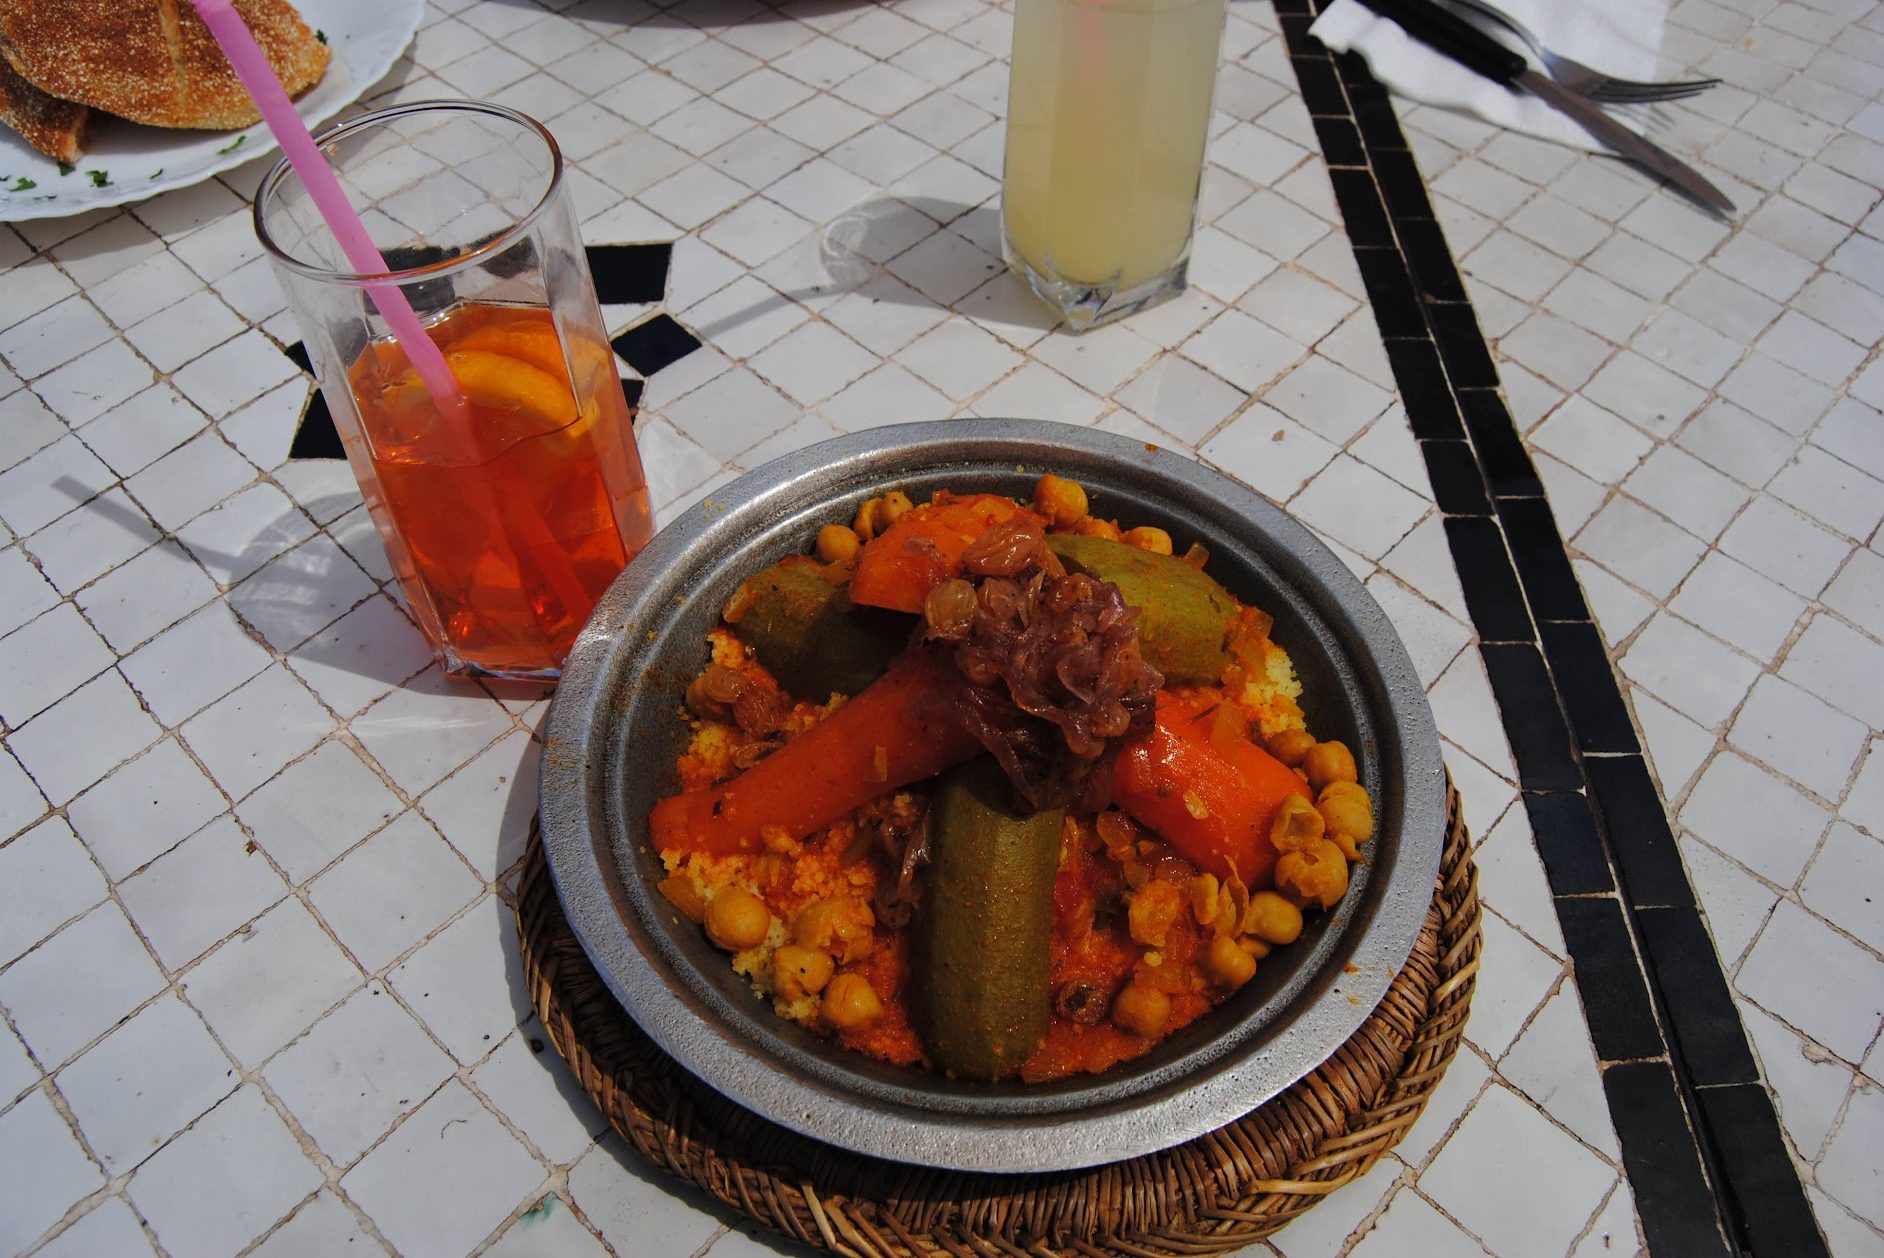 A half-drunk Aperol Spritz and a plate of vegetable tagine